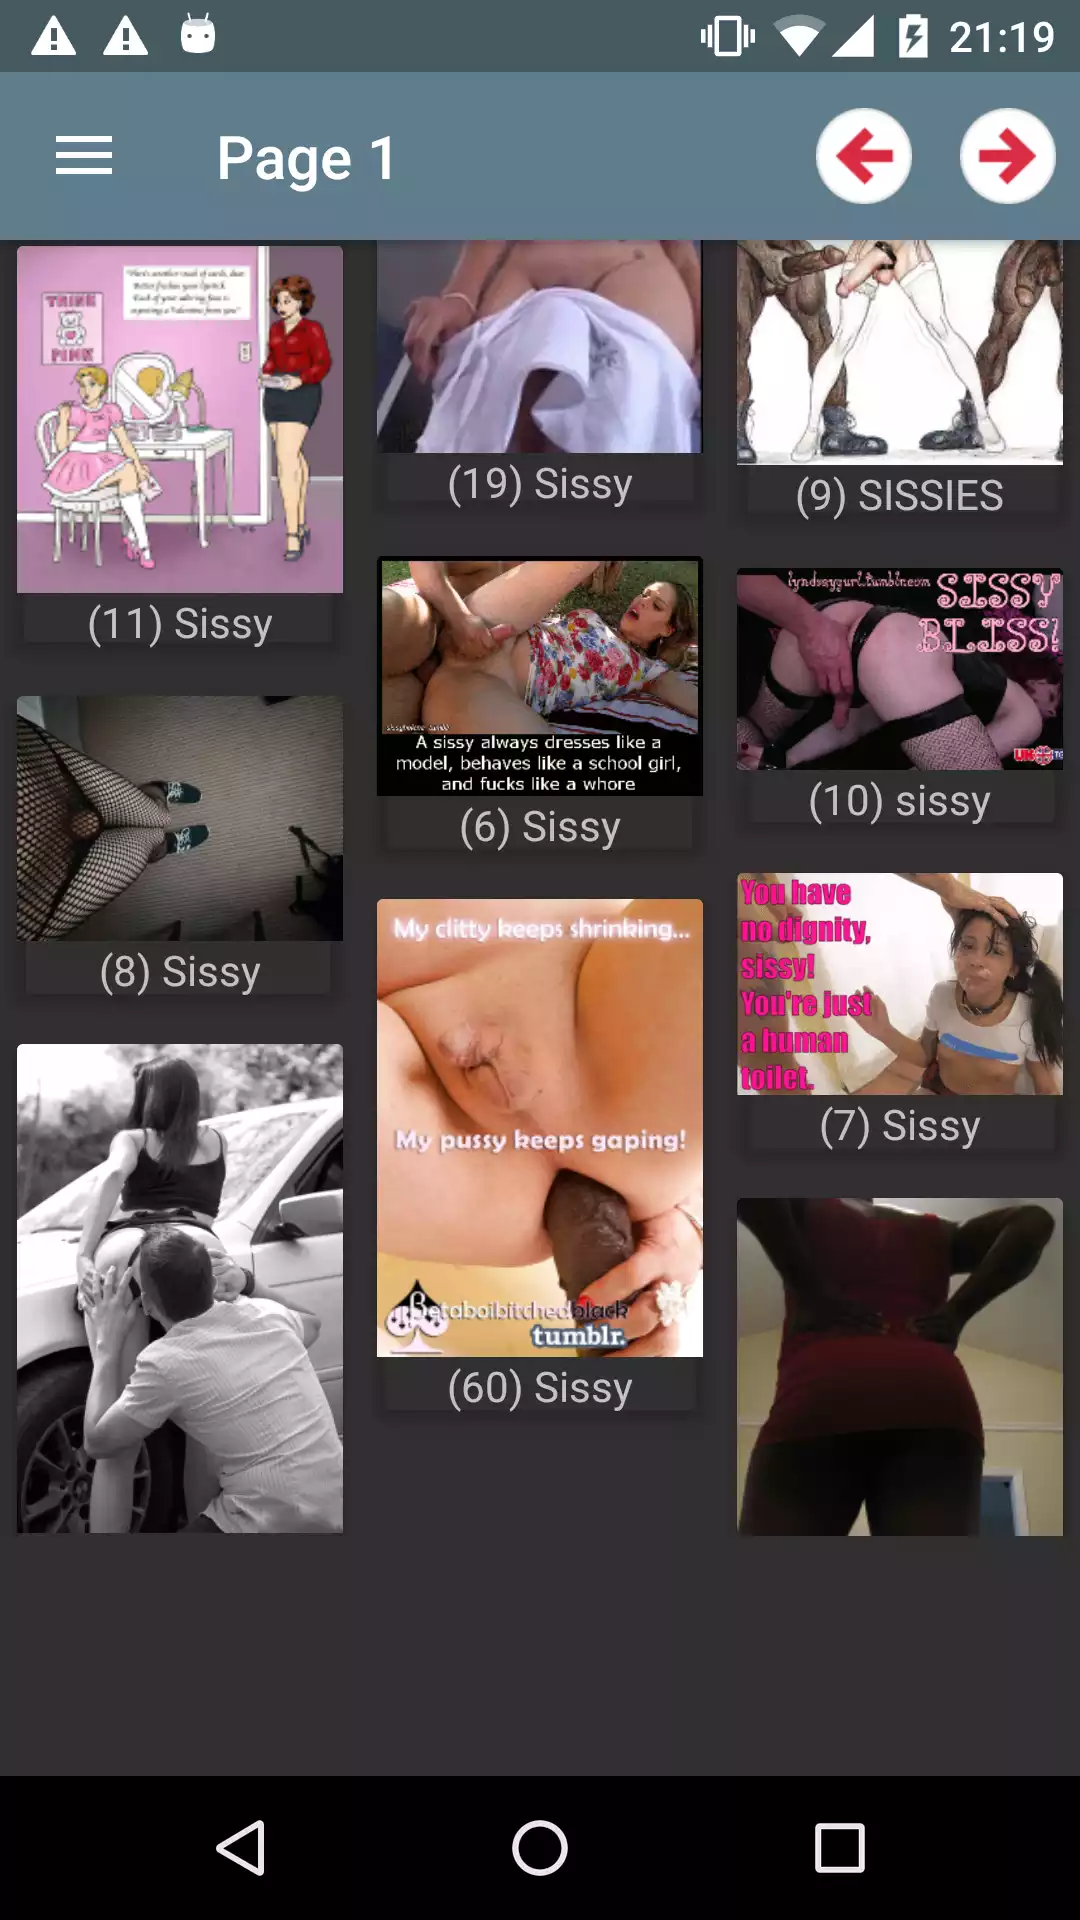 Femboy Galleries app,photo,porn,apps,pornstar,cuckhold,sexy,images,puzzle,photos,alexis,download,pics,hentai,for,texas,and,wallpaper,apk,with,galleries,adult,android,manga,panties,hot